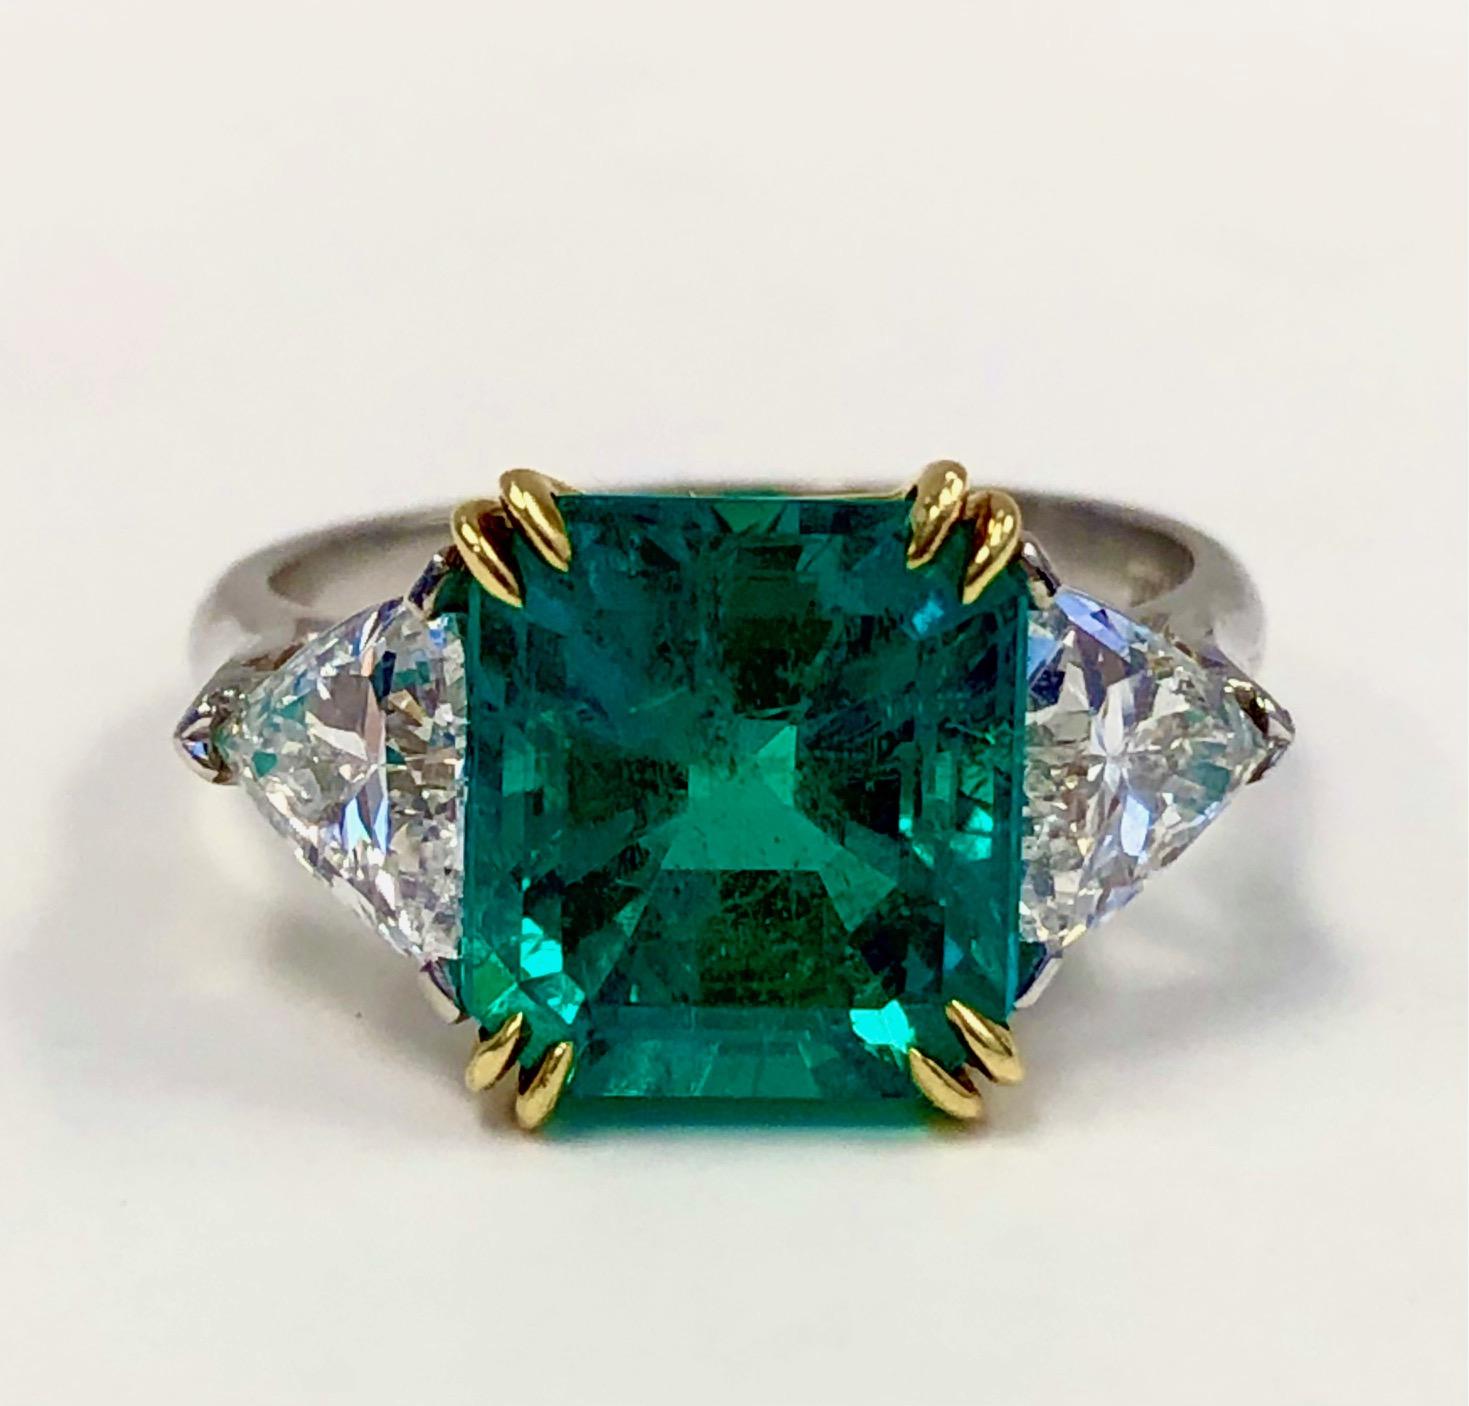 Classic and elegant three stone ring, handmade in Platinum and 18K Yellow Gold, set with a fine Colombian Emerald 3.47 carats and a matching pair of high quality Trillion Diamonds 1.26 carats.

We design and manufacture our jewelry in our workshop,